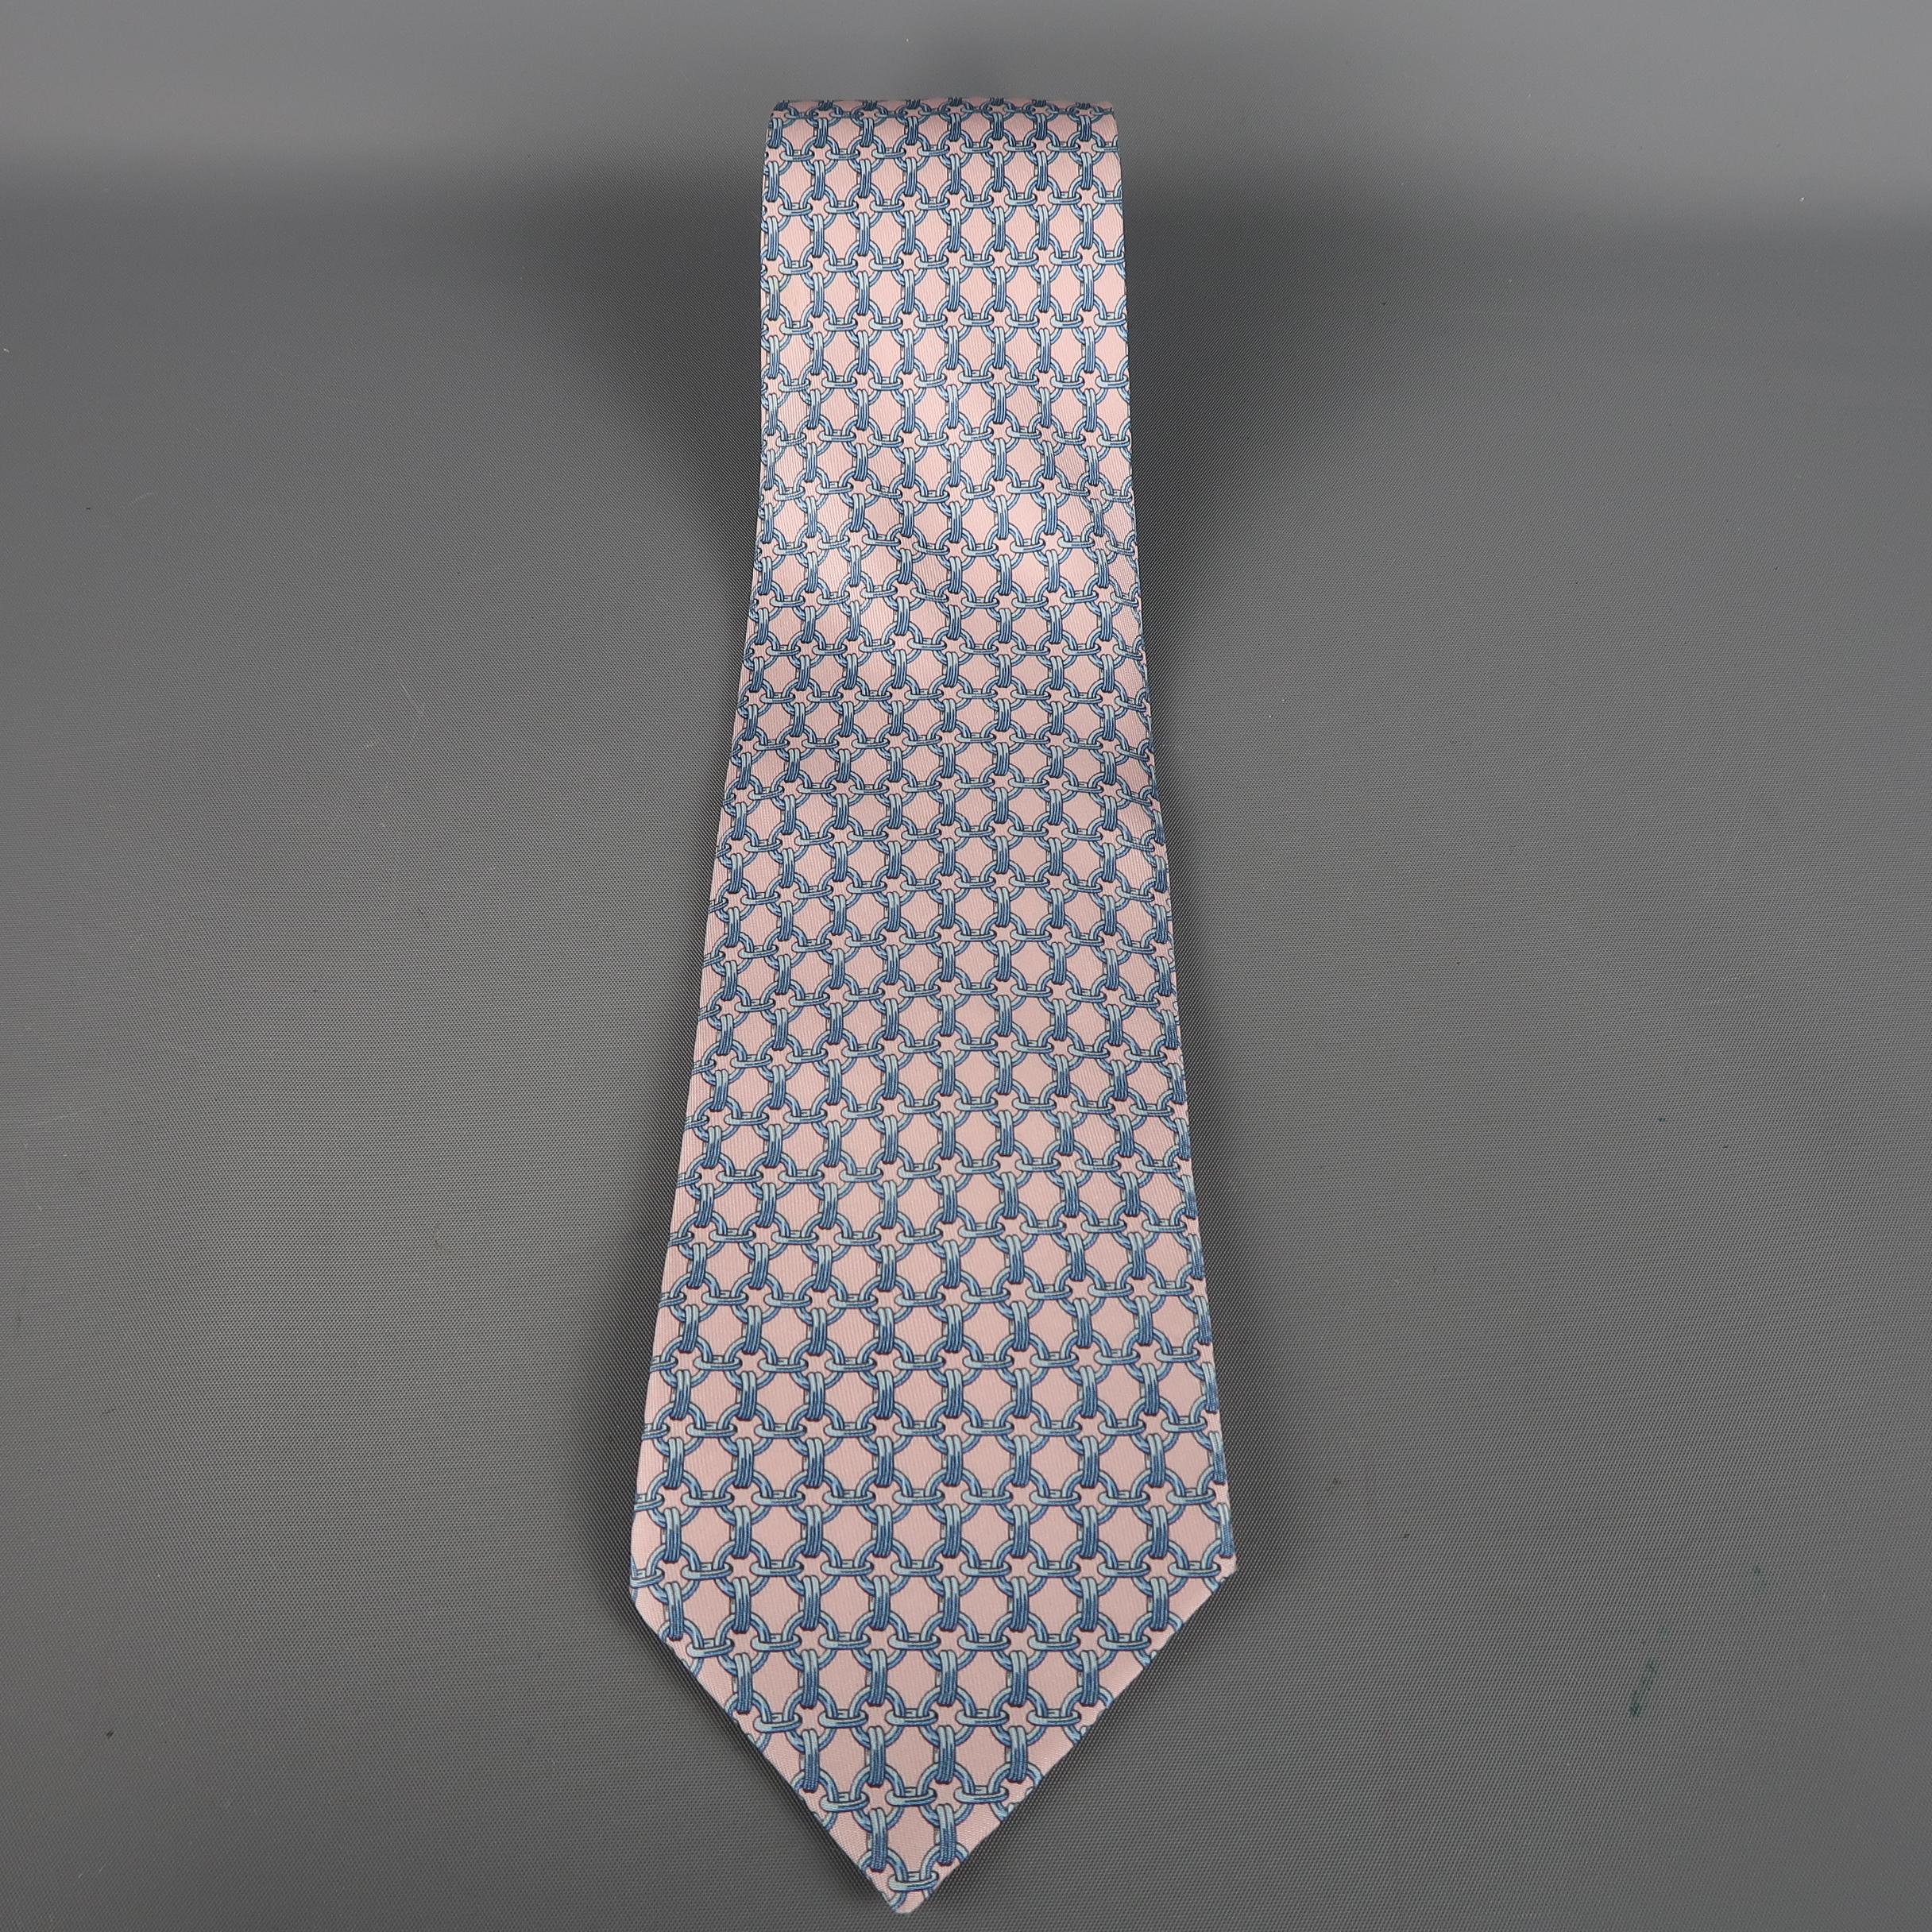 HERMES tie come in pink and blue silk with an all over grey tones chain print. With box.  Made in France.
 
Excellent Pre-Owned Condition.
 
Width: 3.5 in.